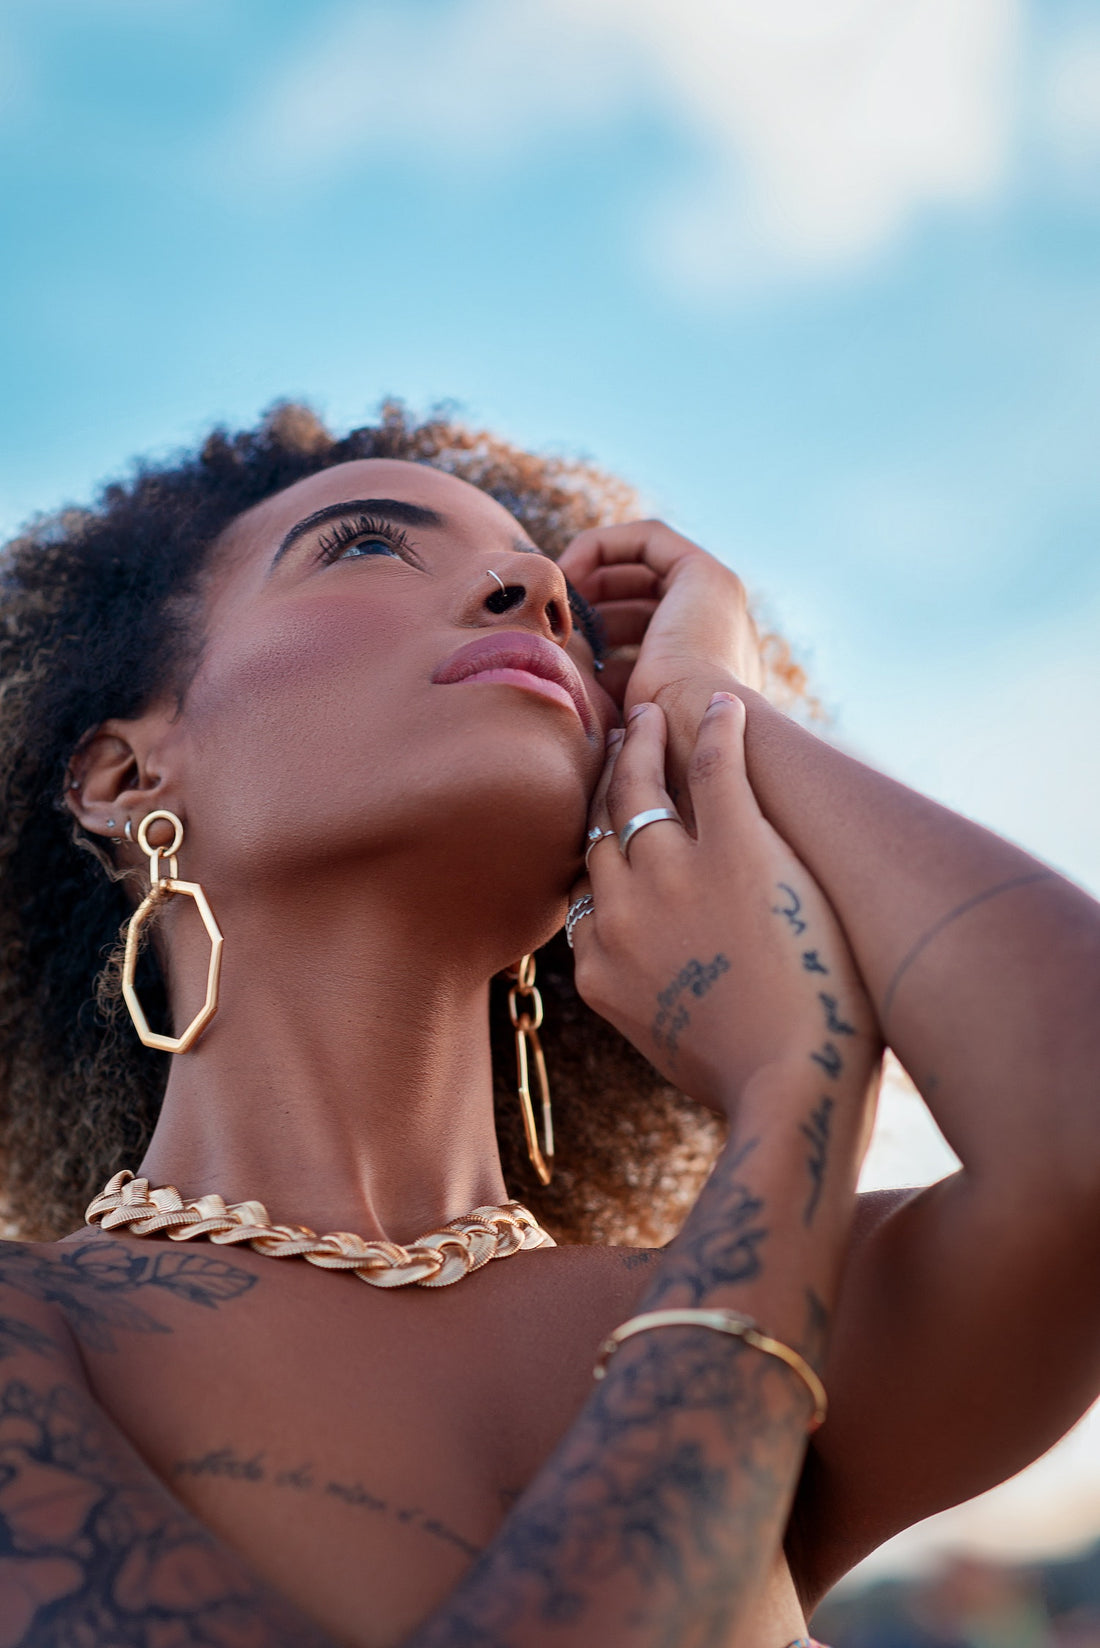 black woman wearing lots of jewelry on a sunny day and looking thoughtfully into the eye